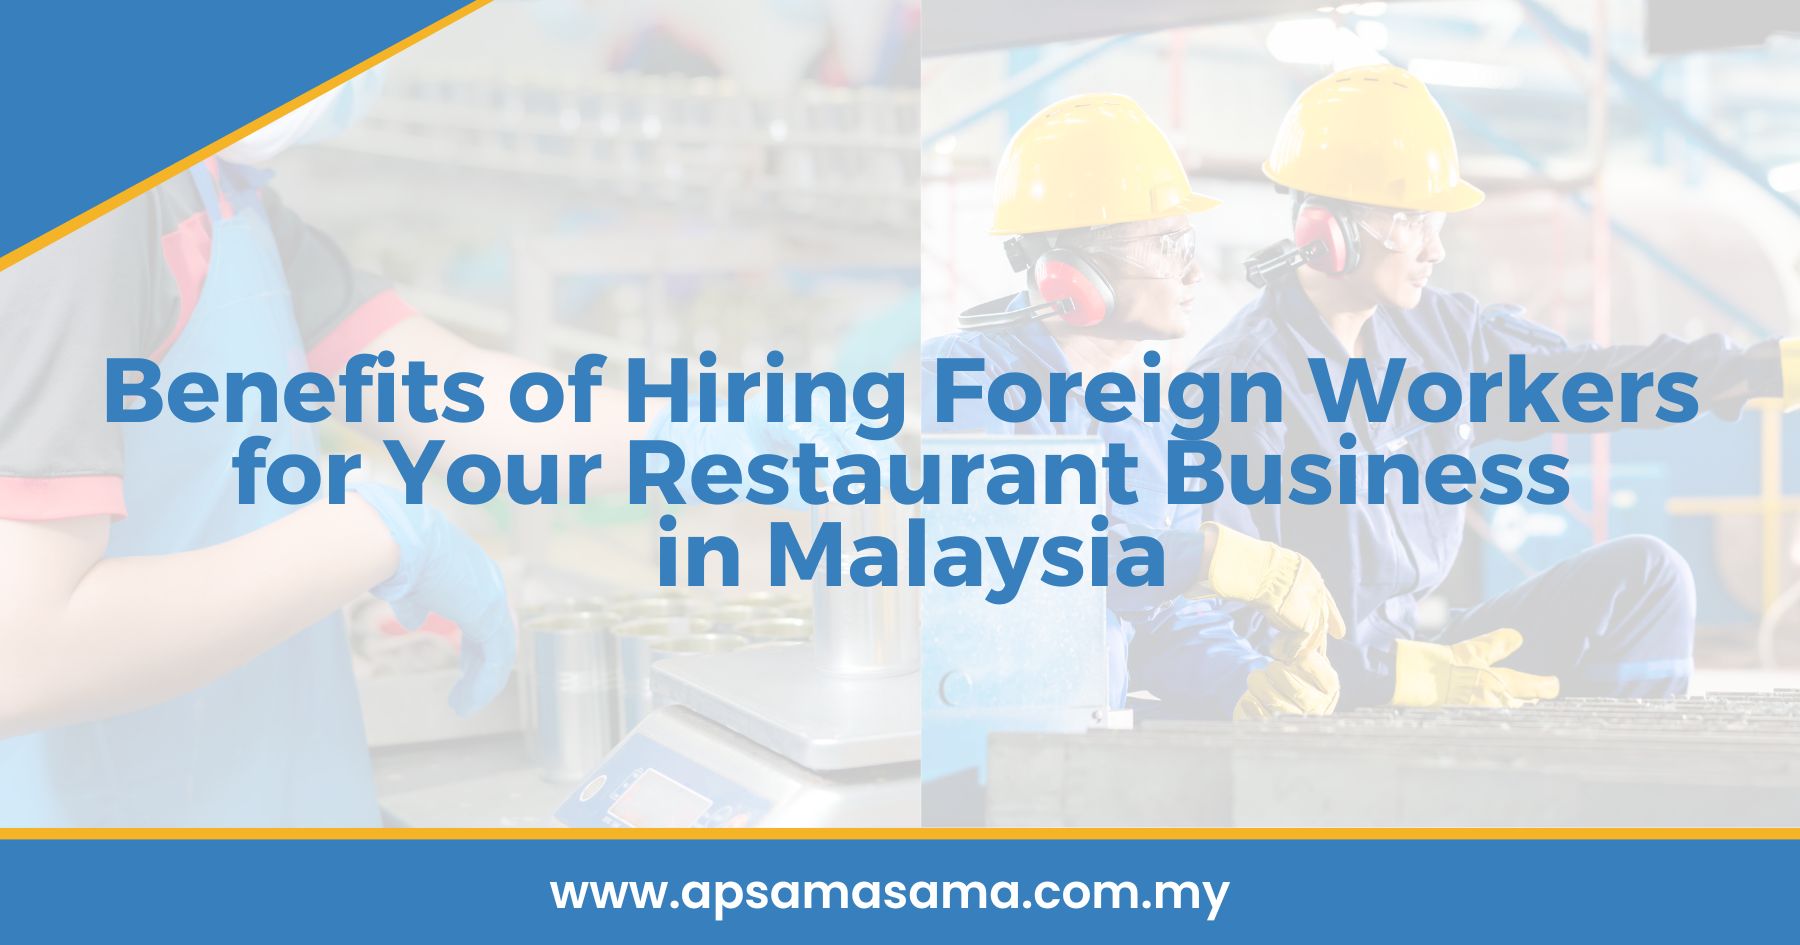 Benefits of Hiring Foreign Workers for Your Restaurant Business in Malaysia